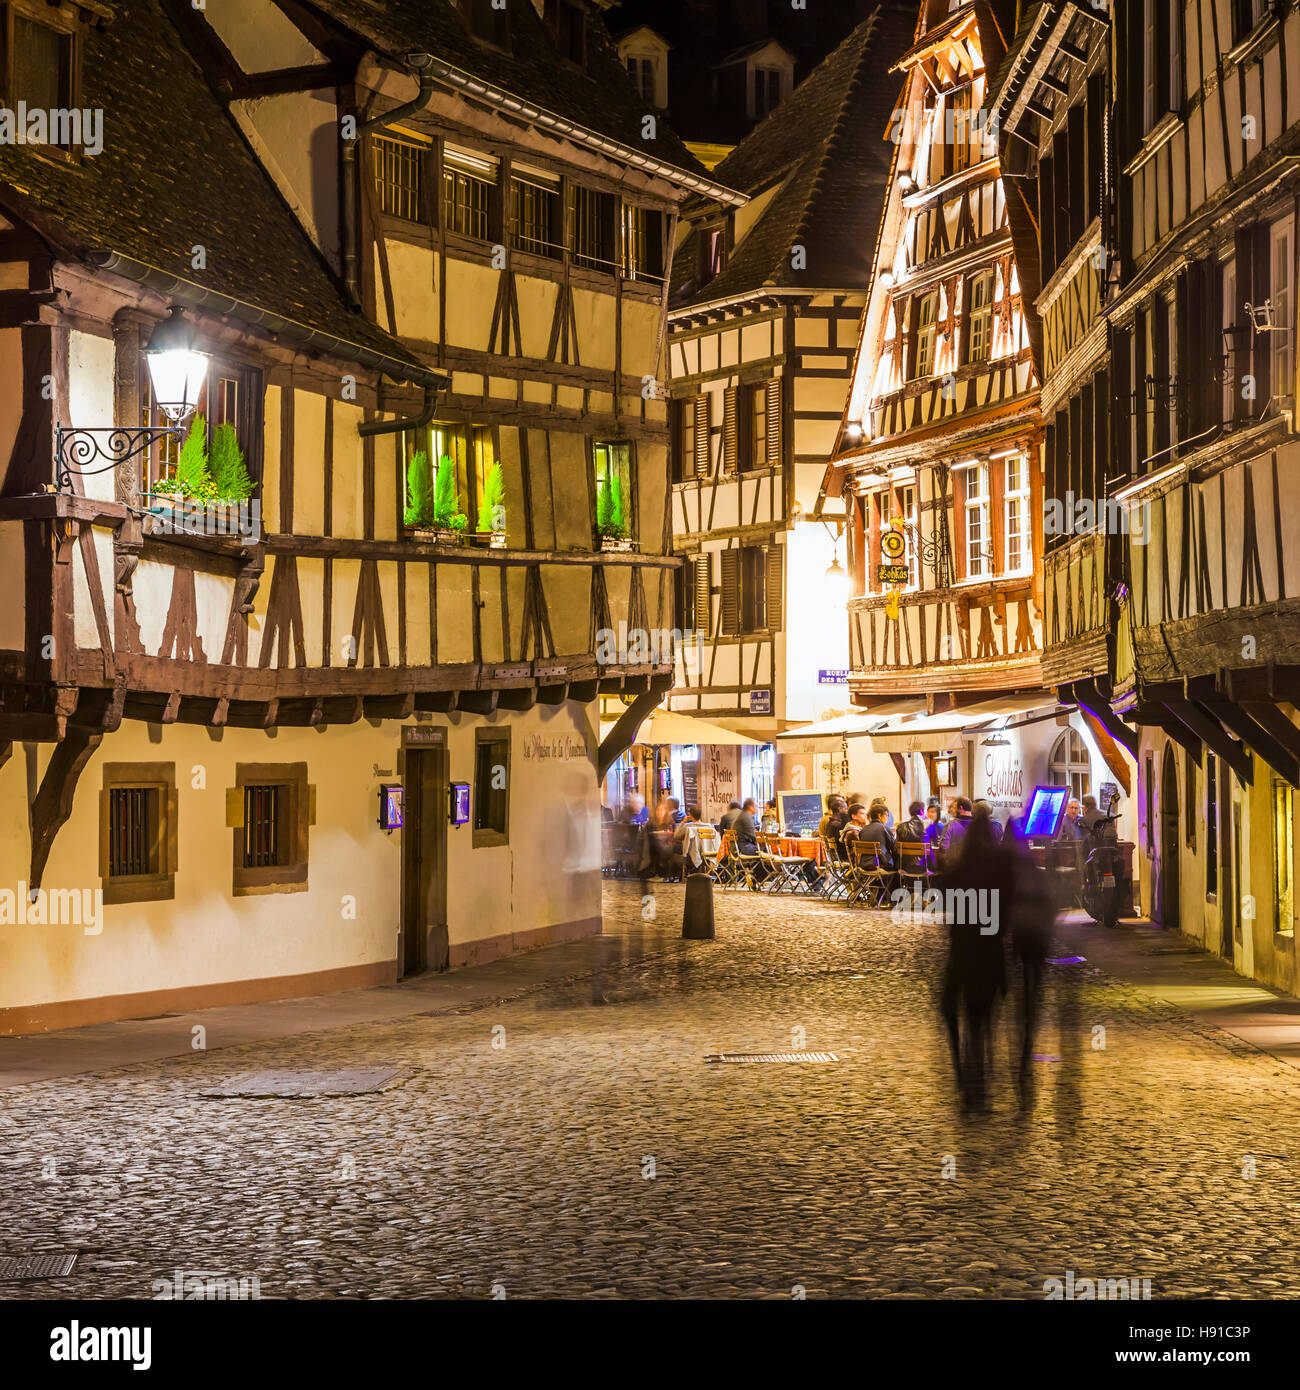 TYPICAL RESTAURANTS AND WINE TAVERNS AT LA PETITE FRANCE, NIGHT LIFE, STRASBOURG, ALSACE, FRANCE Stock Photo